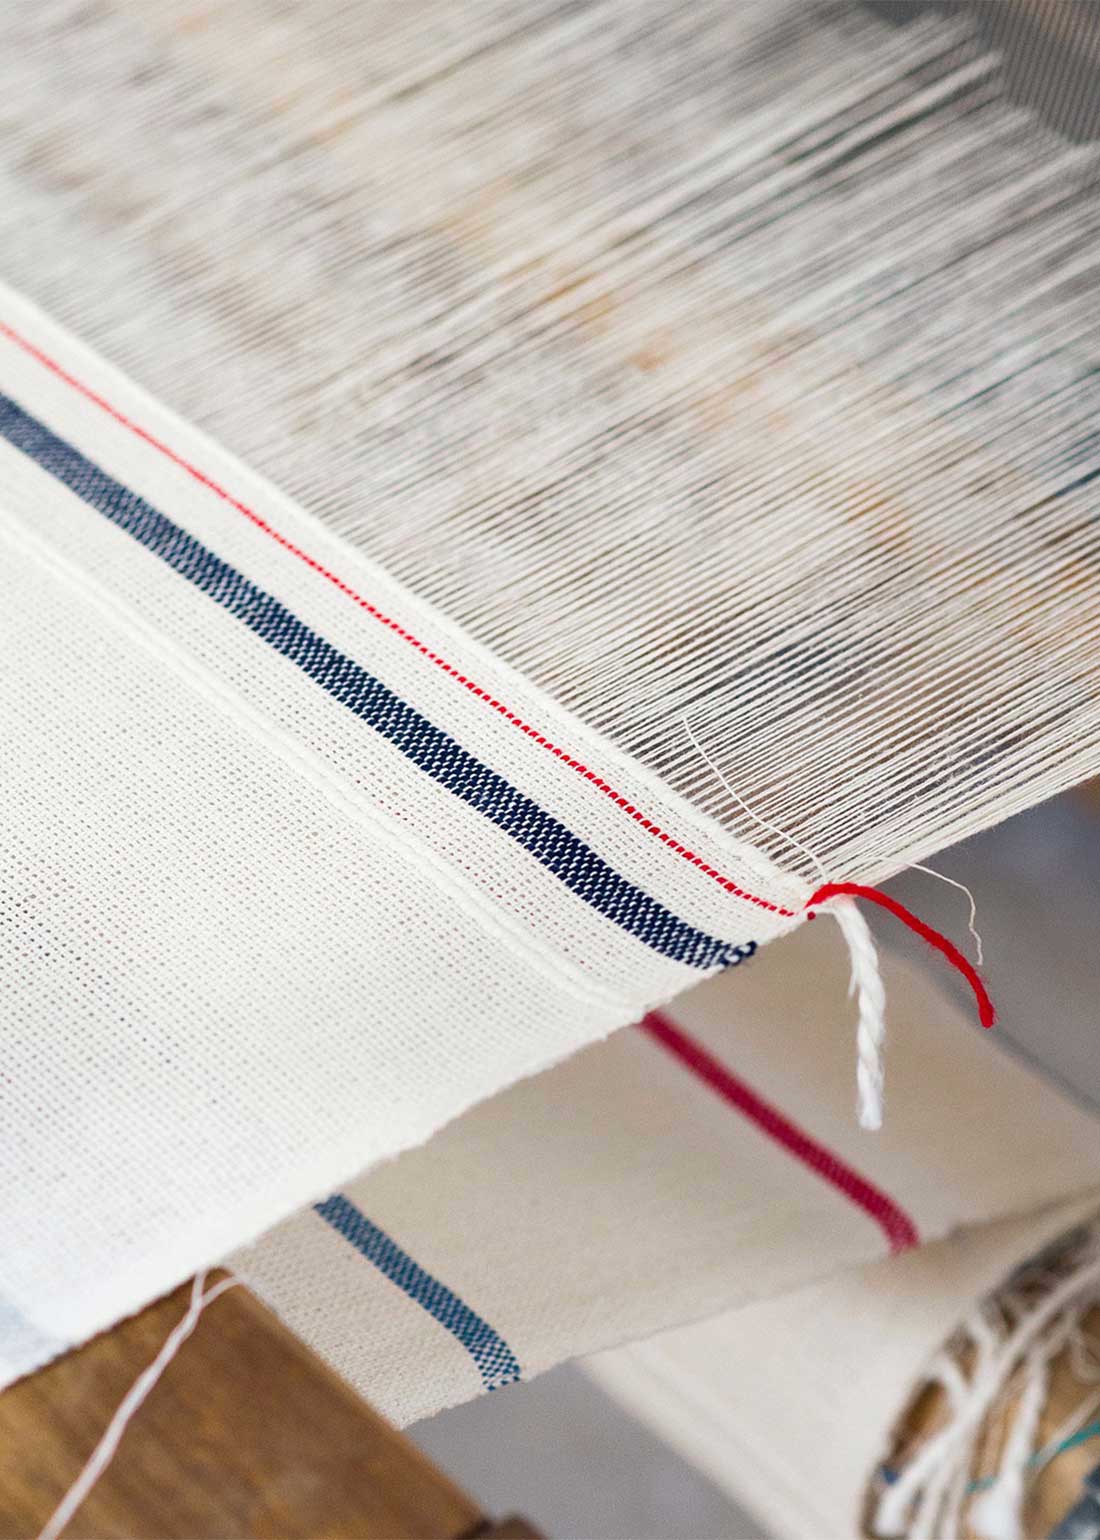 Barn red & cream striped country style grain sack kitchen towel